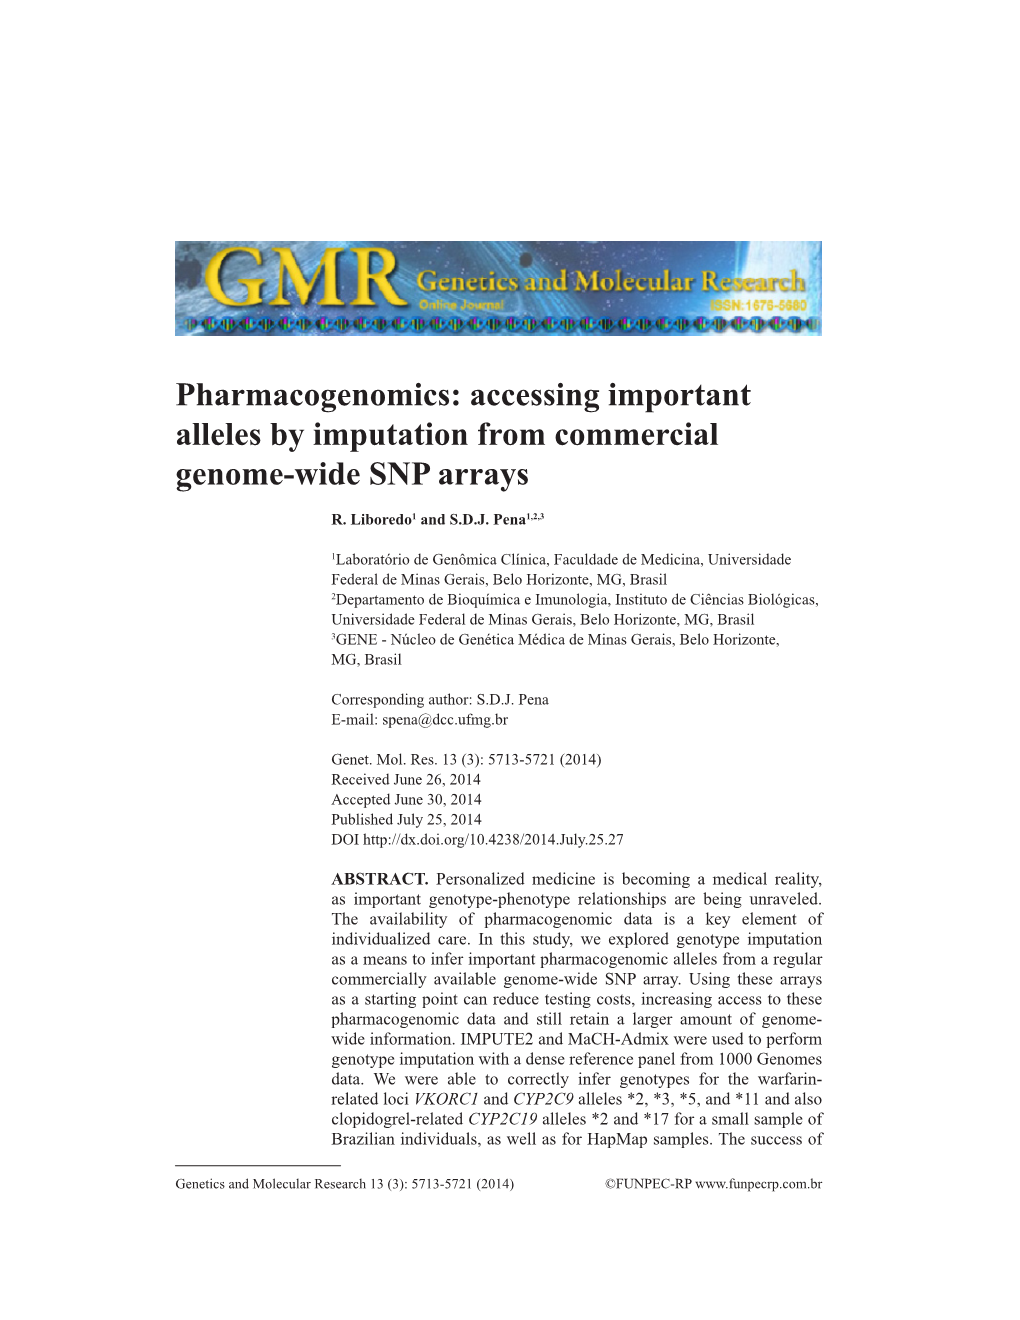 Pharmacogenomics: Accessing Important Alleles by Imputation from Commercial Genome-Wide SNP Arrays